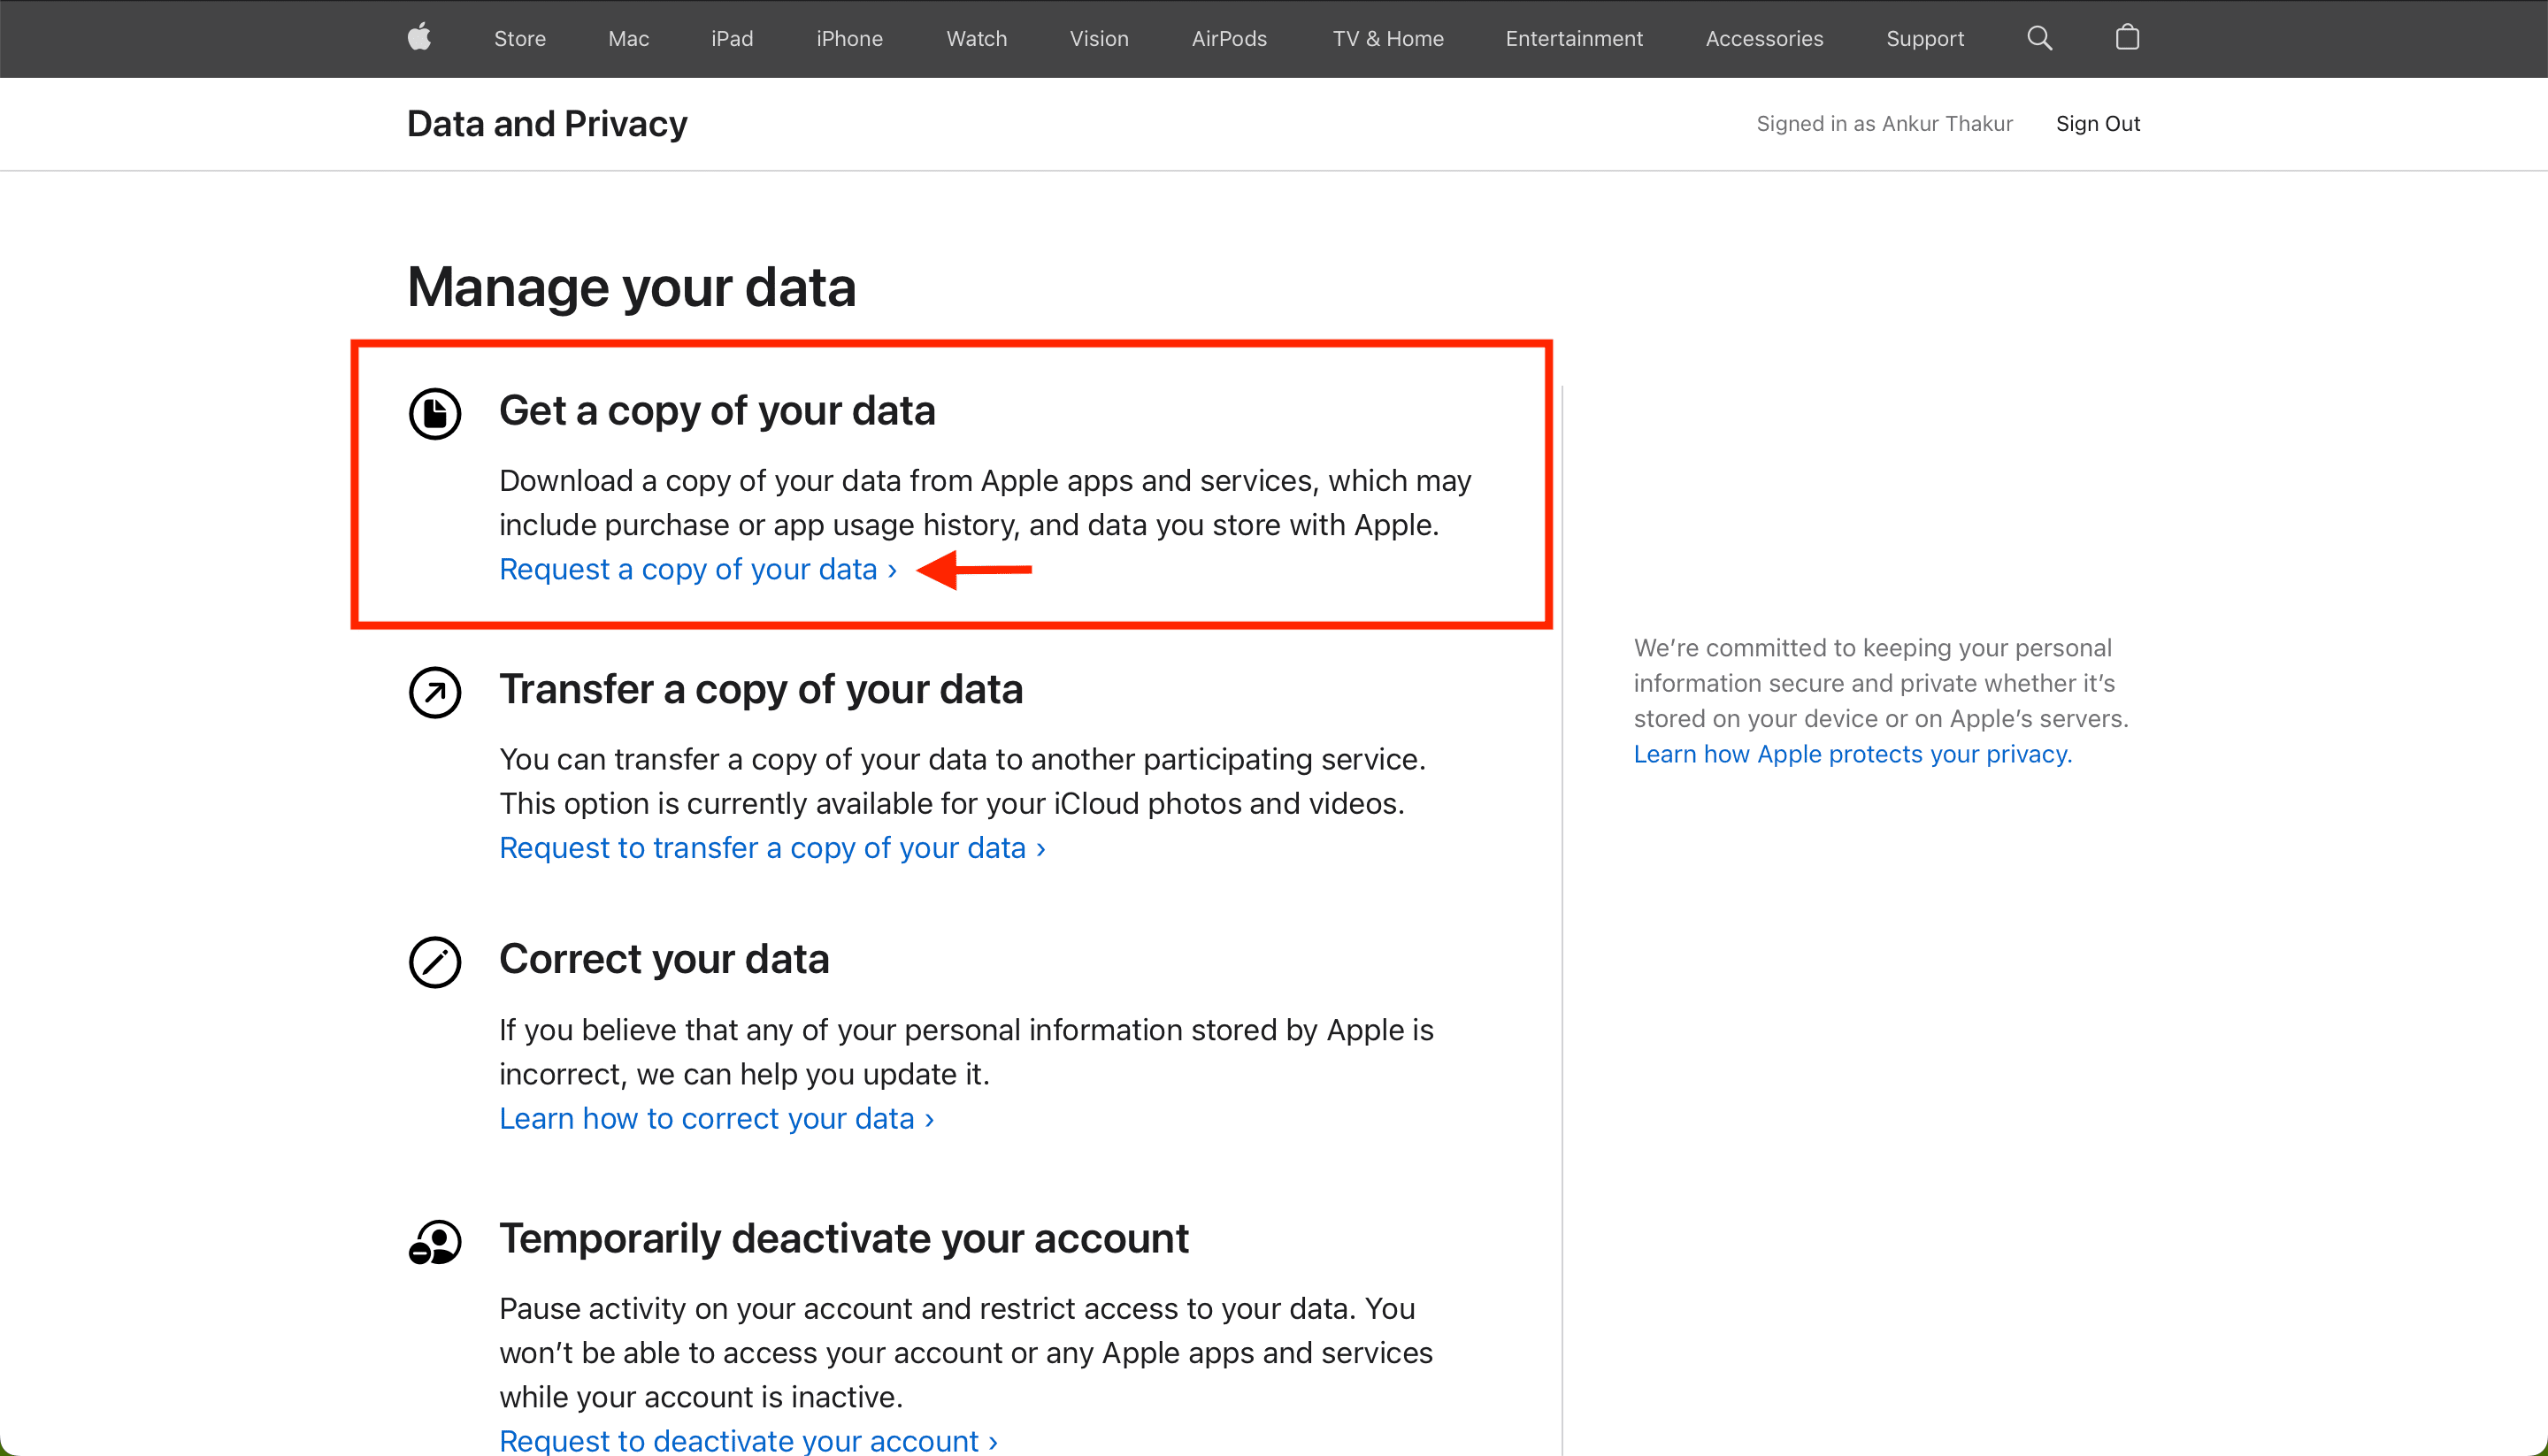 Request a copy of your data from Apple